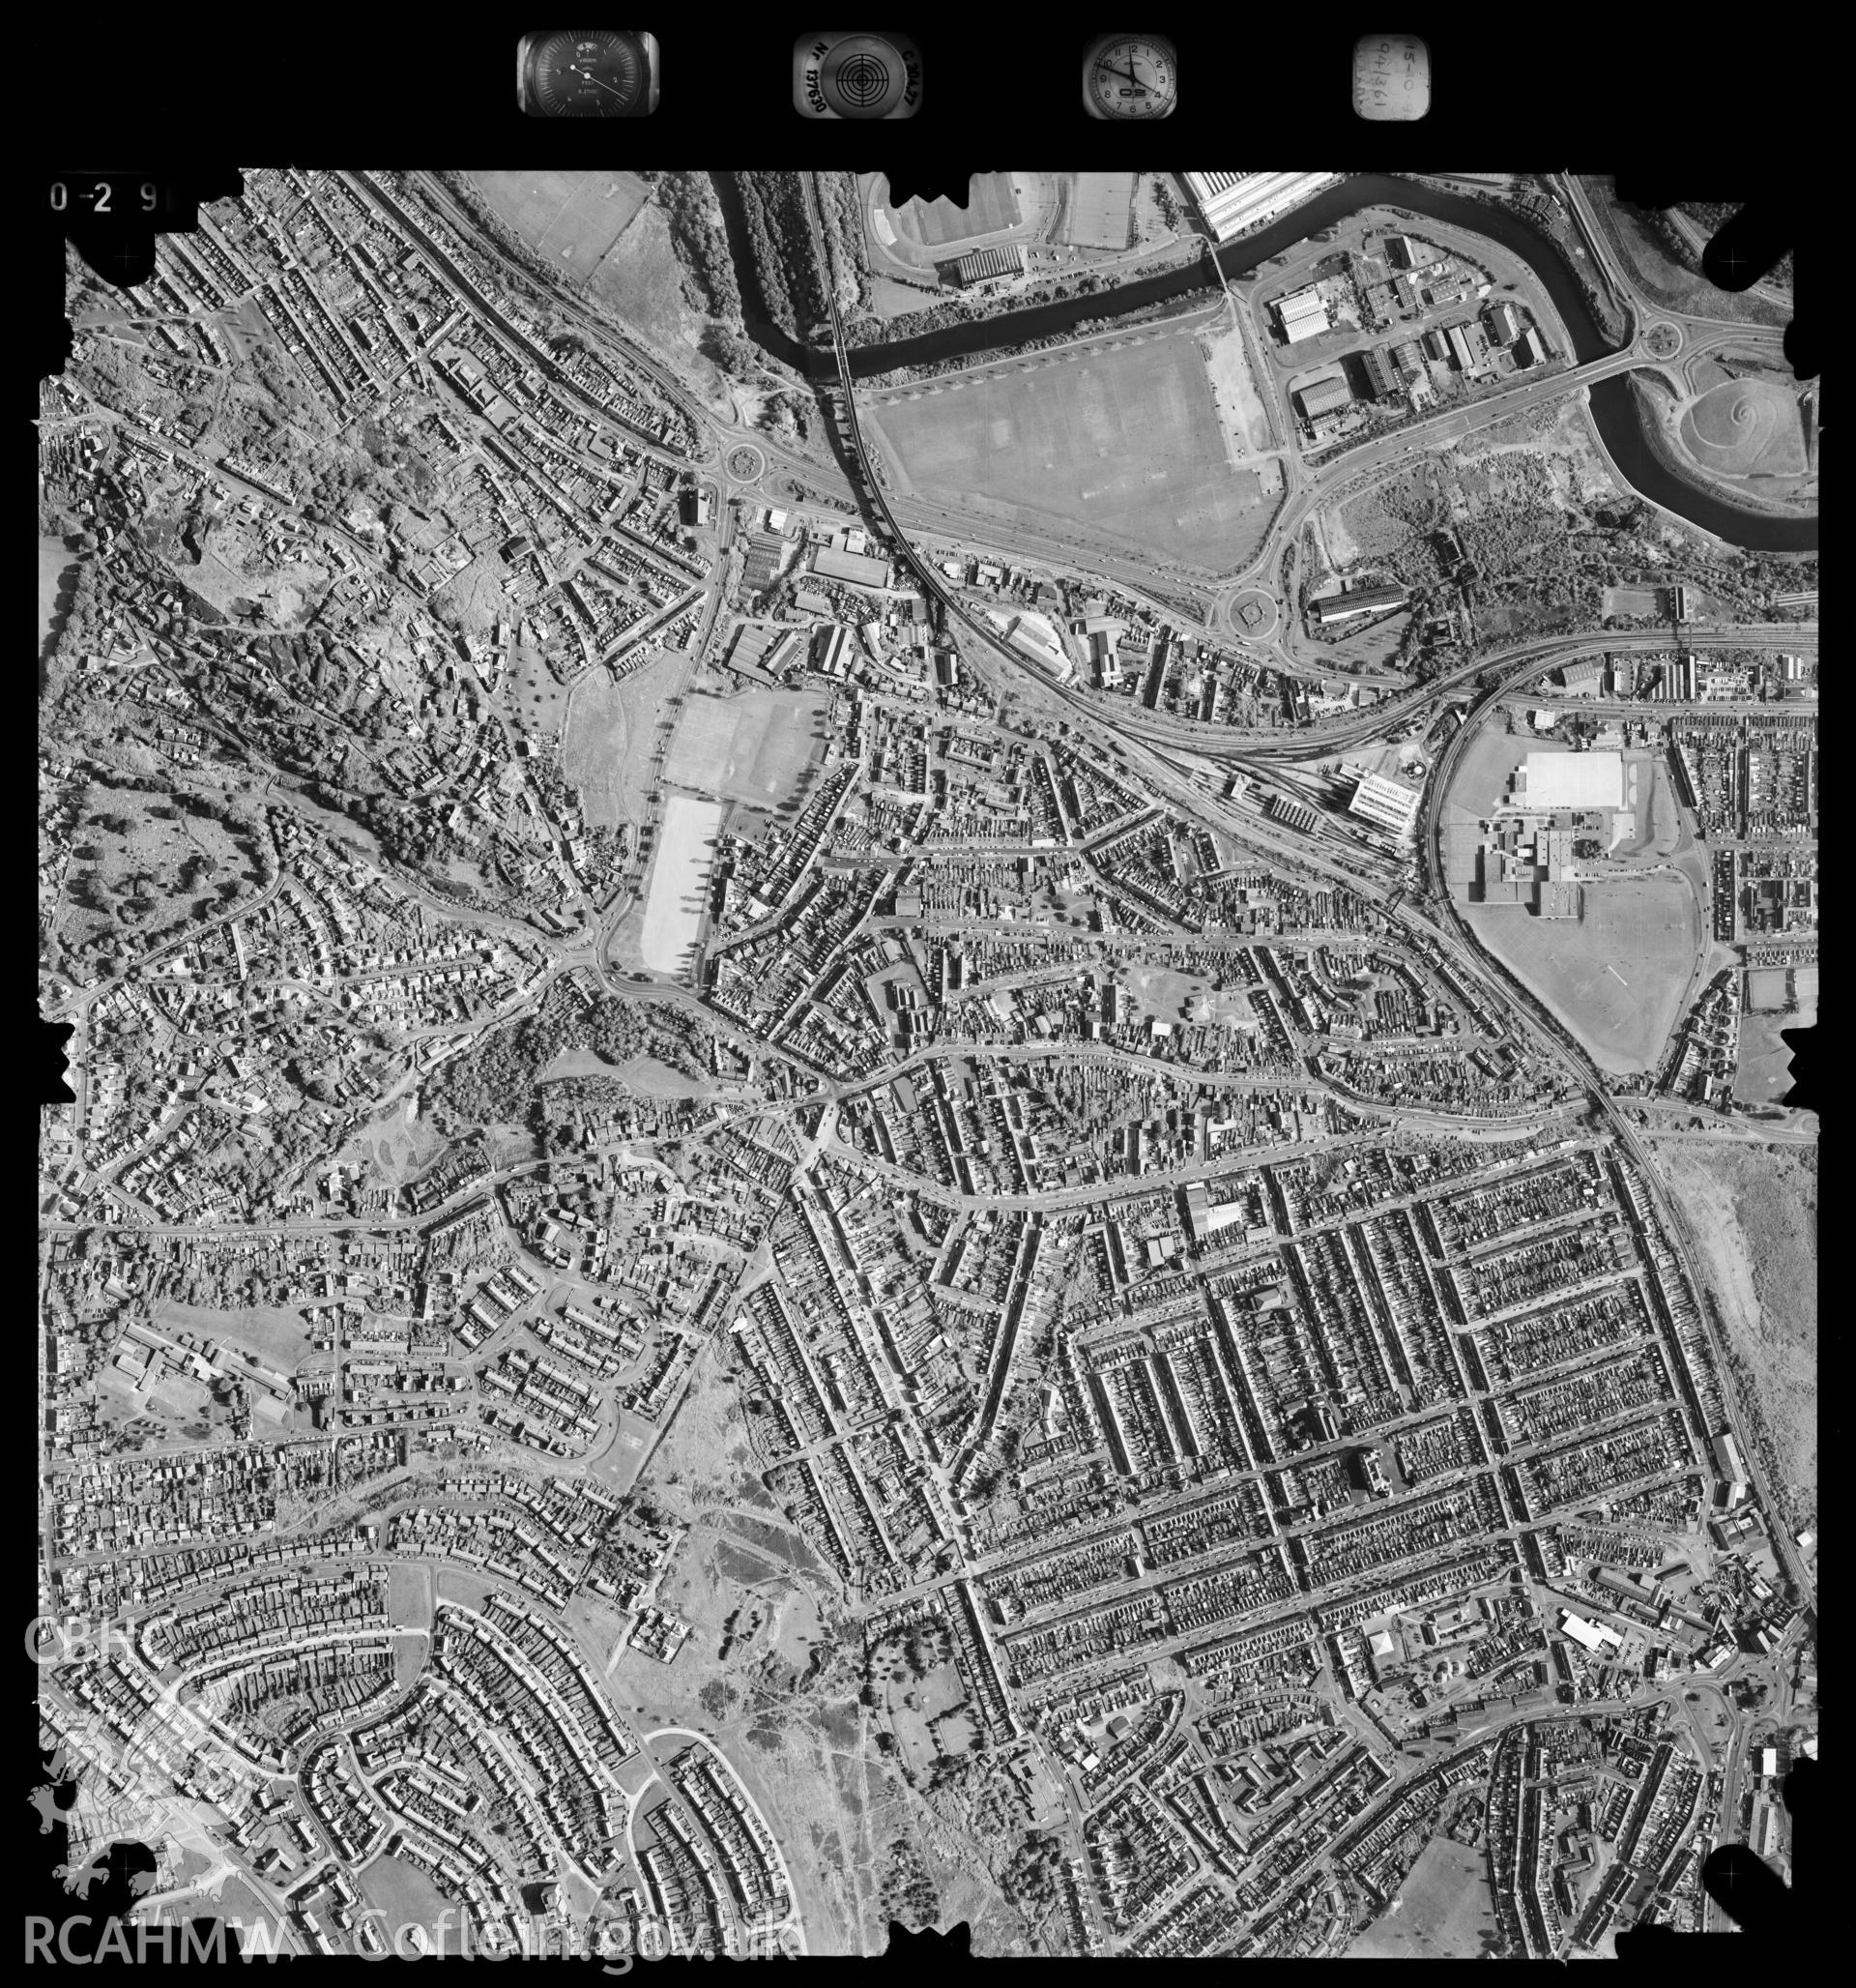 Digitized copy of an aerial photograph showing the Manselton area Swansea, taken by Ordnance Survey, 1994.